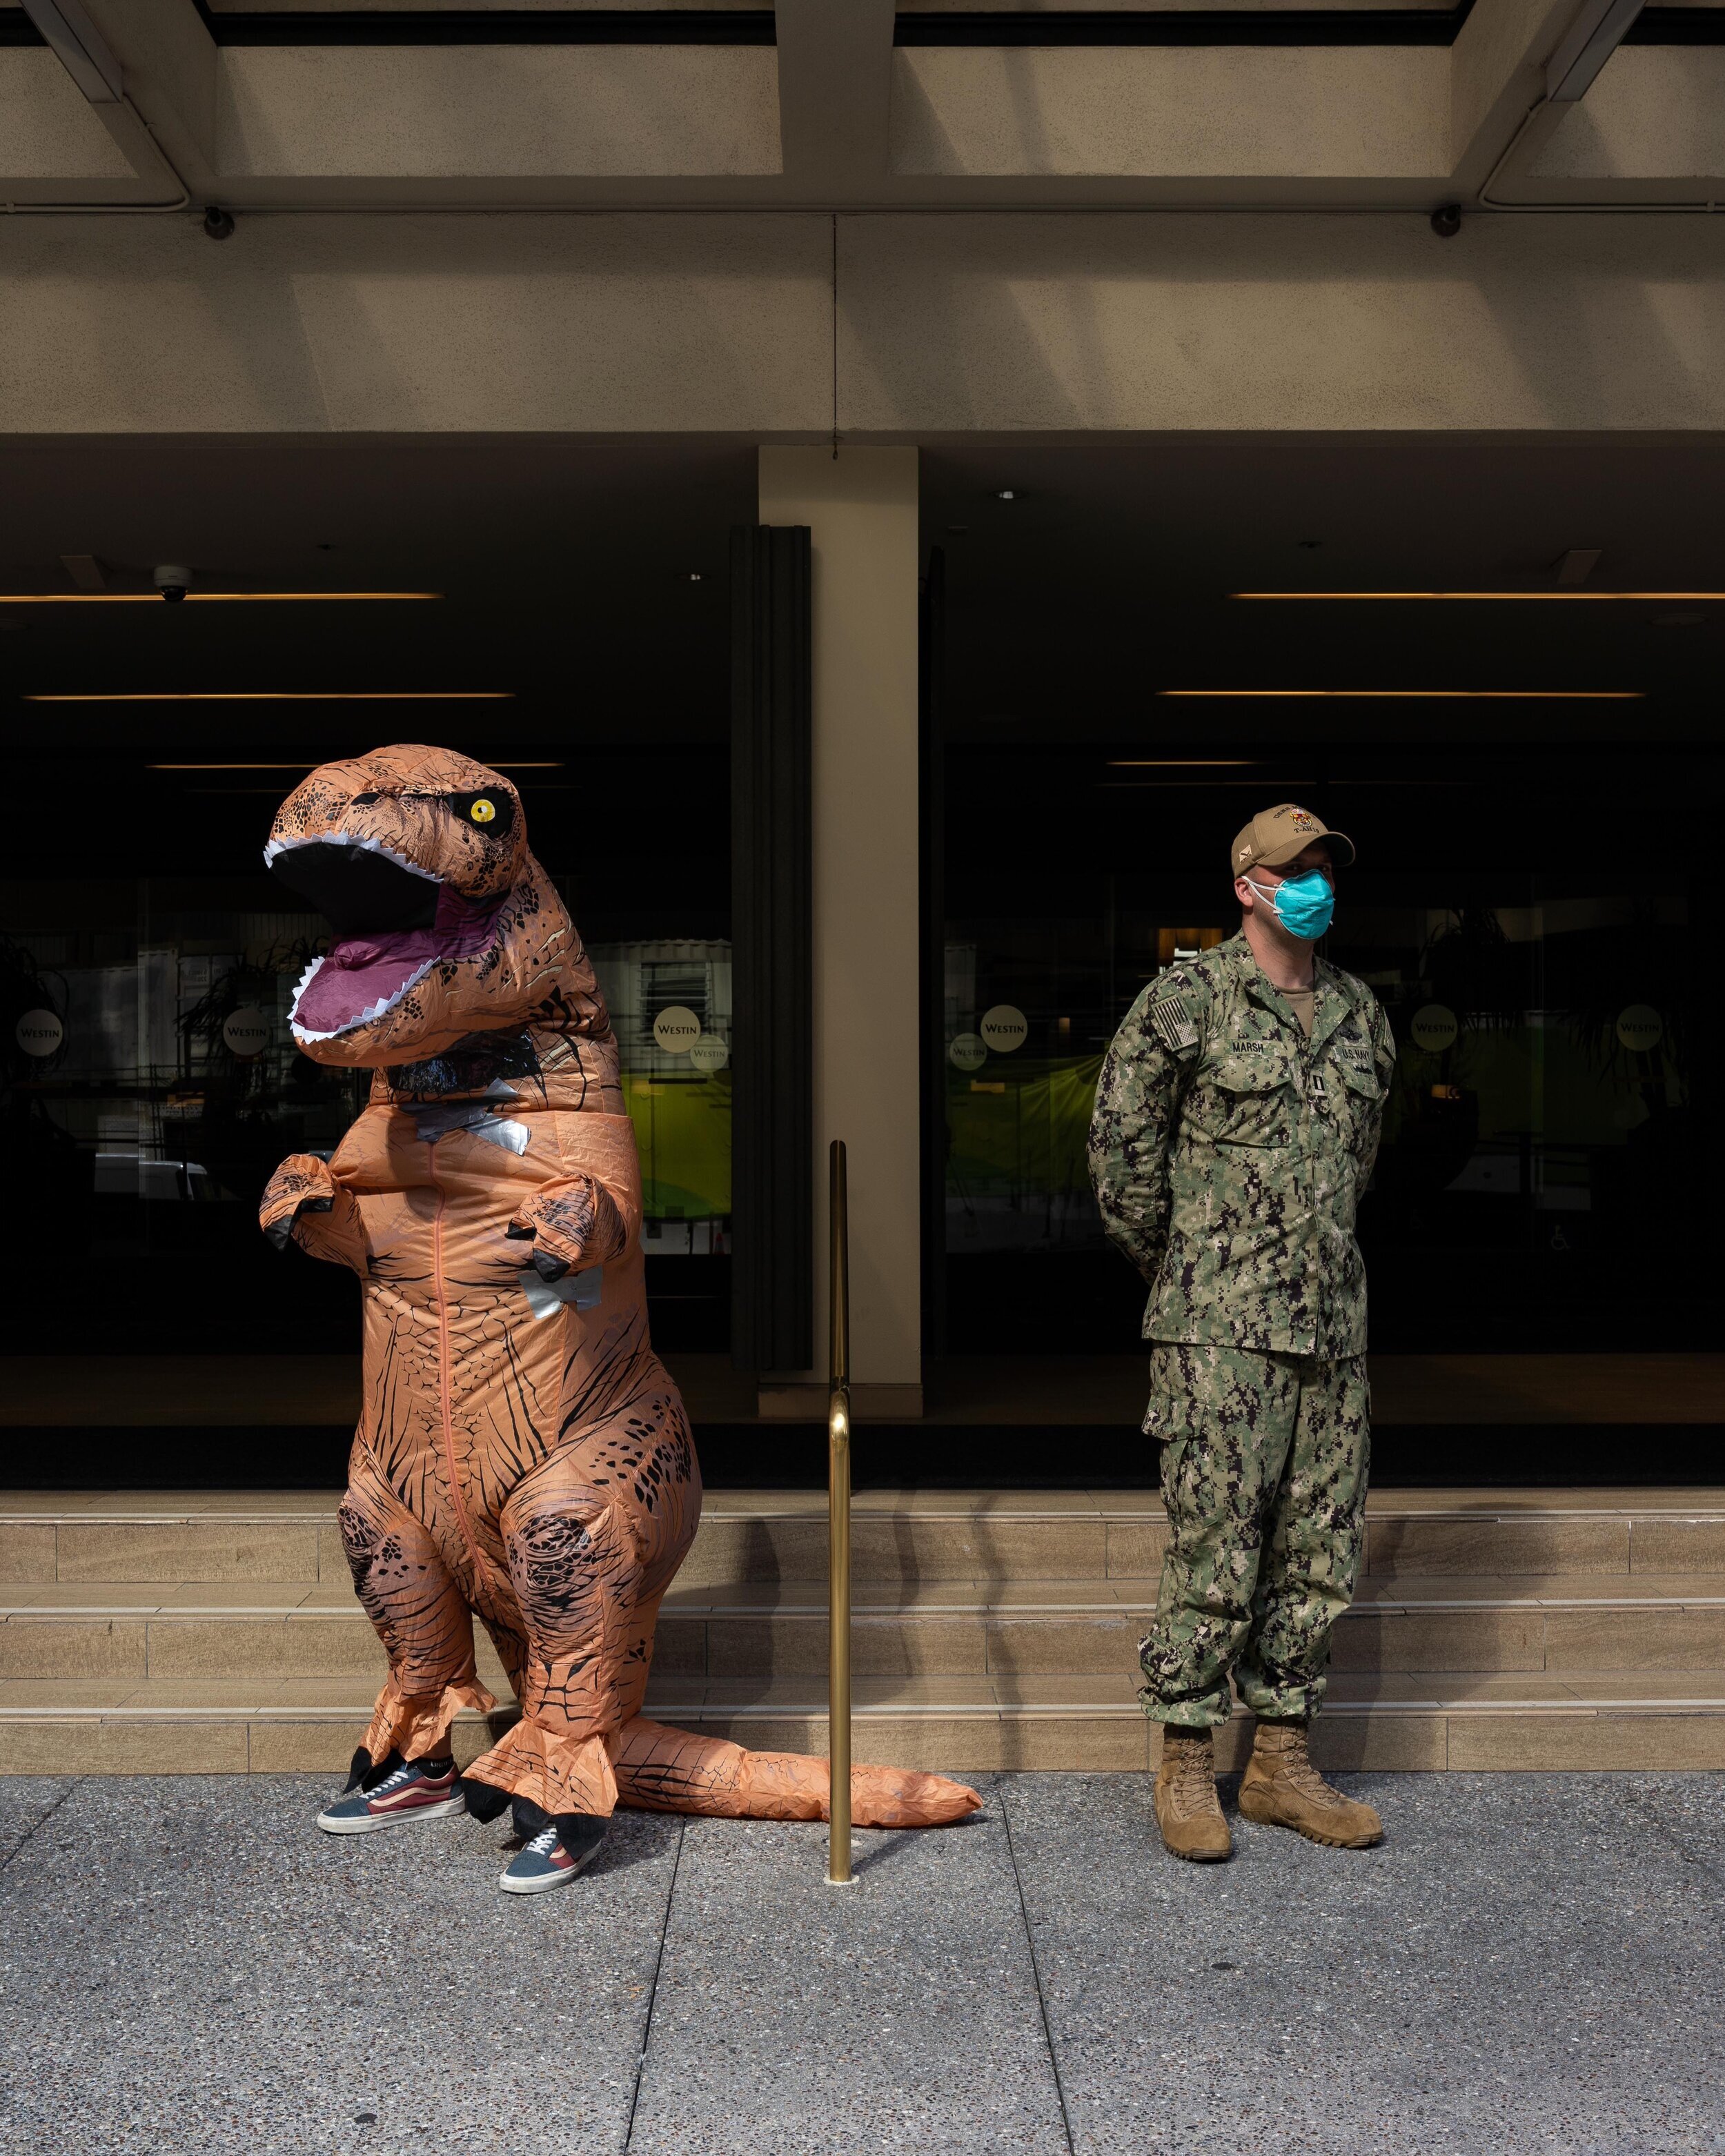  “My man in the suit is also named Patrick. We can do Dino Patrick and Nurse Patrick for the quote. That t-rex suit has been on a bunch of deployments to Afghanistan. The duct tape patches are the only thing keeping the air in.” - Nurse Patrick (Dino